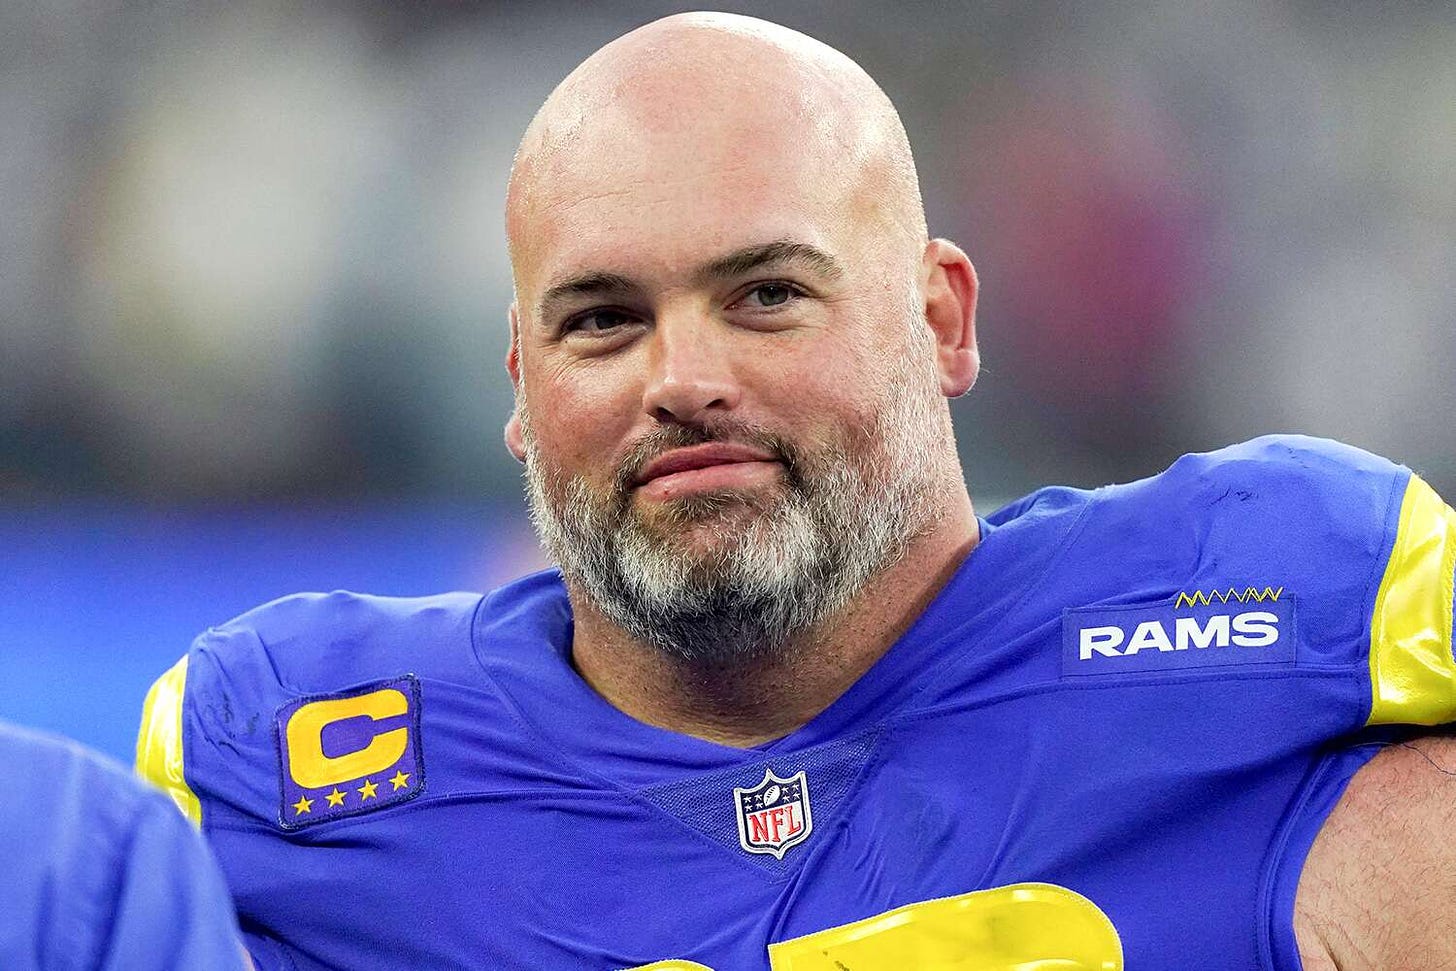 Rams&#39; Andrew Whitworth Hints at Retirement Ahead of Super Bowl | PEOPLE.com